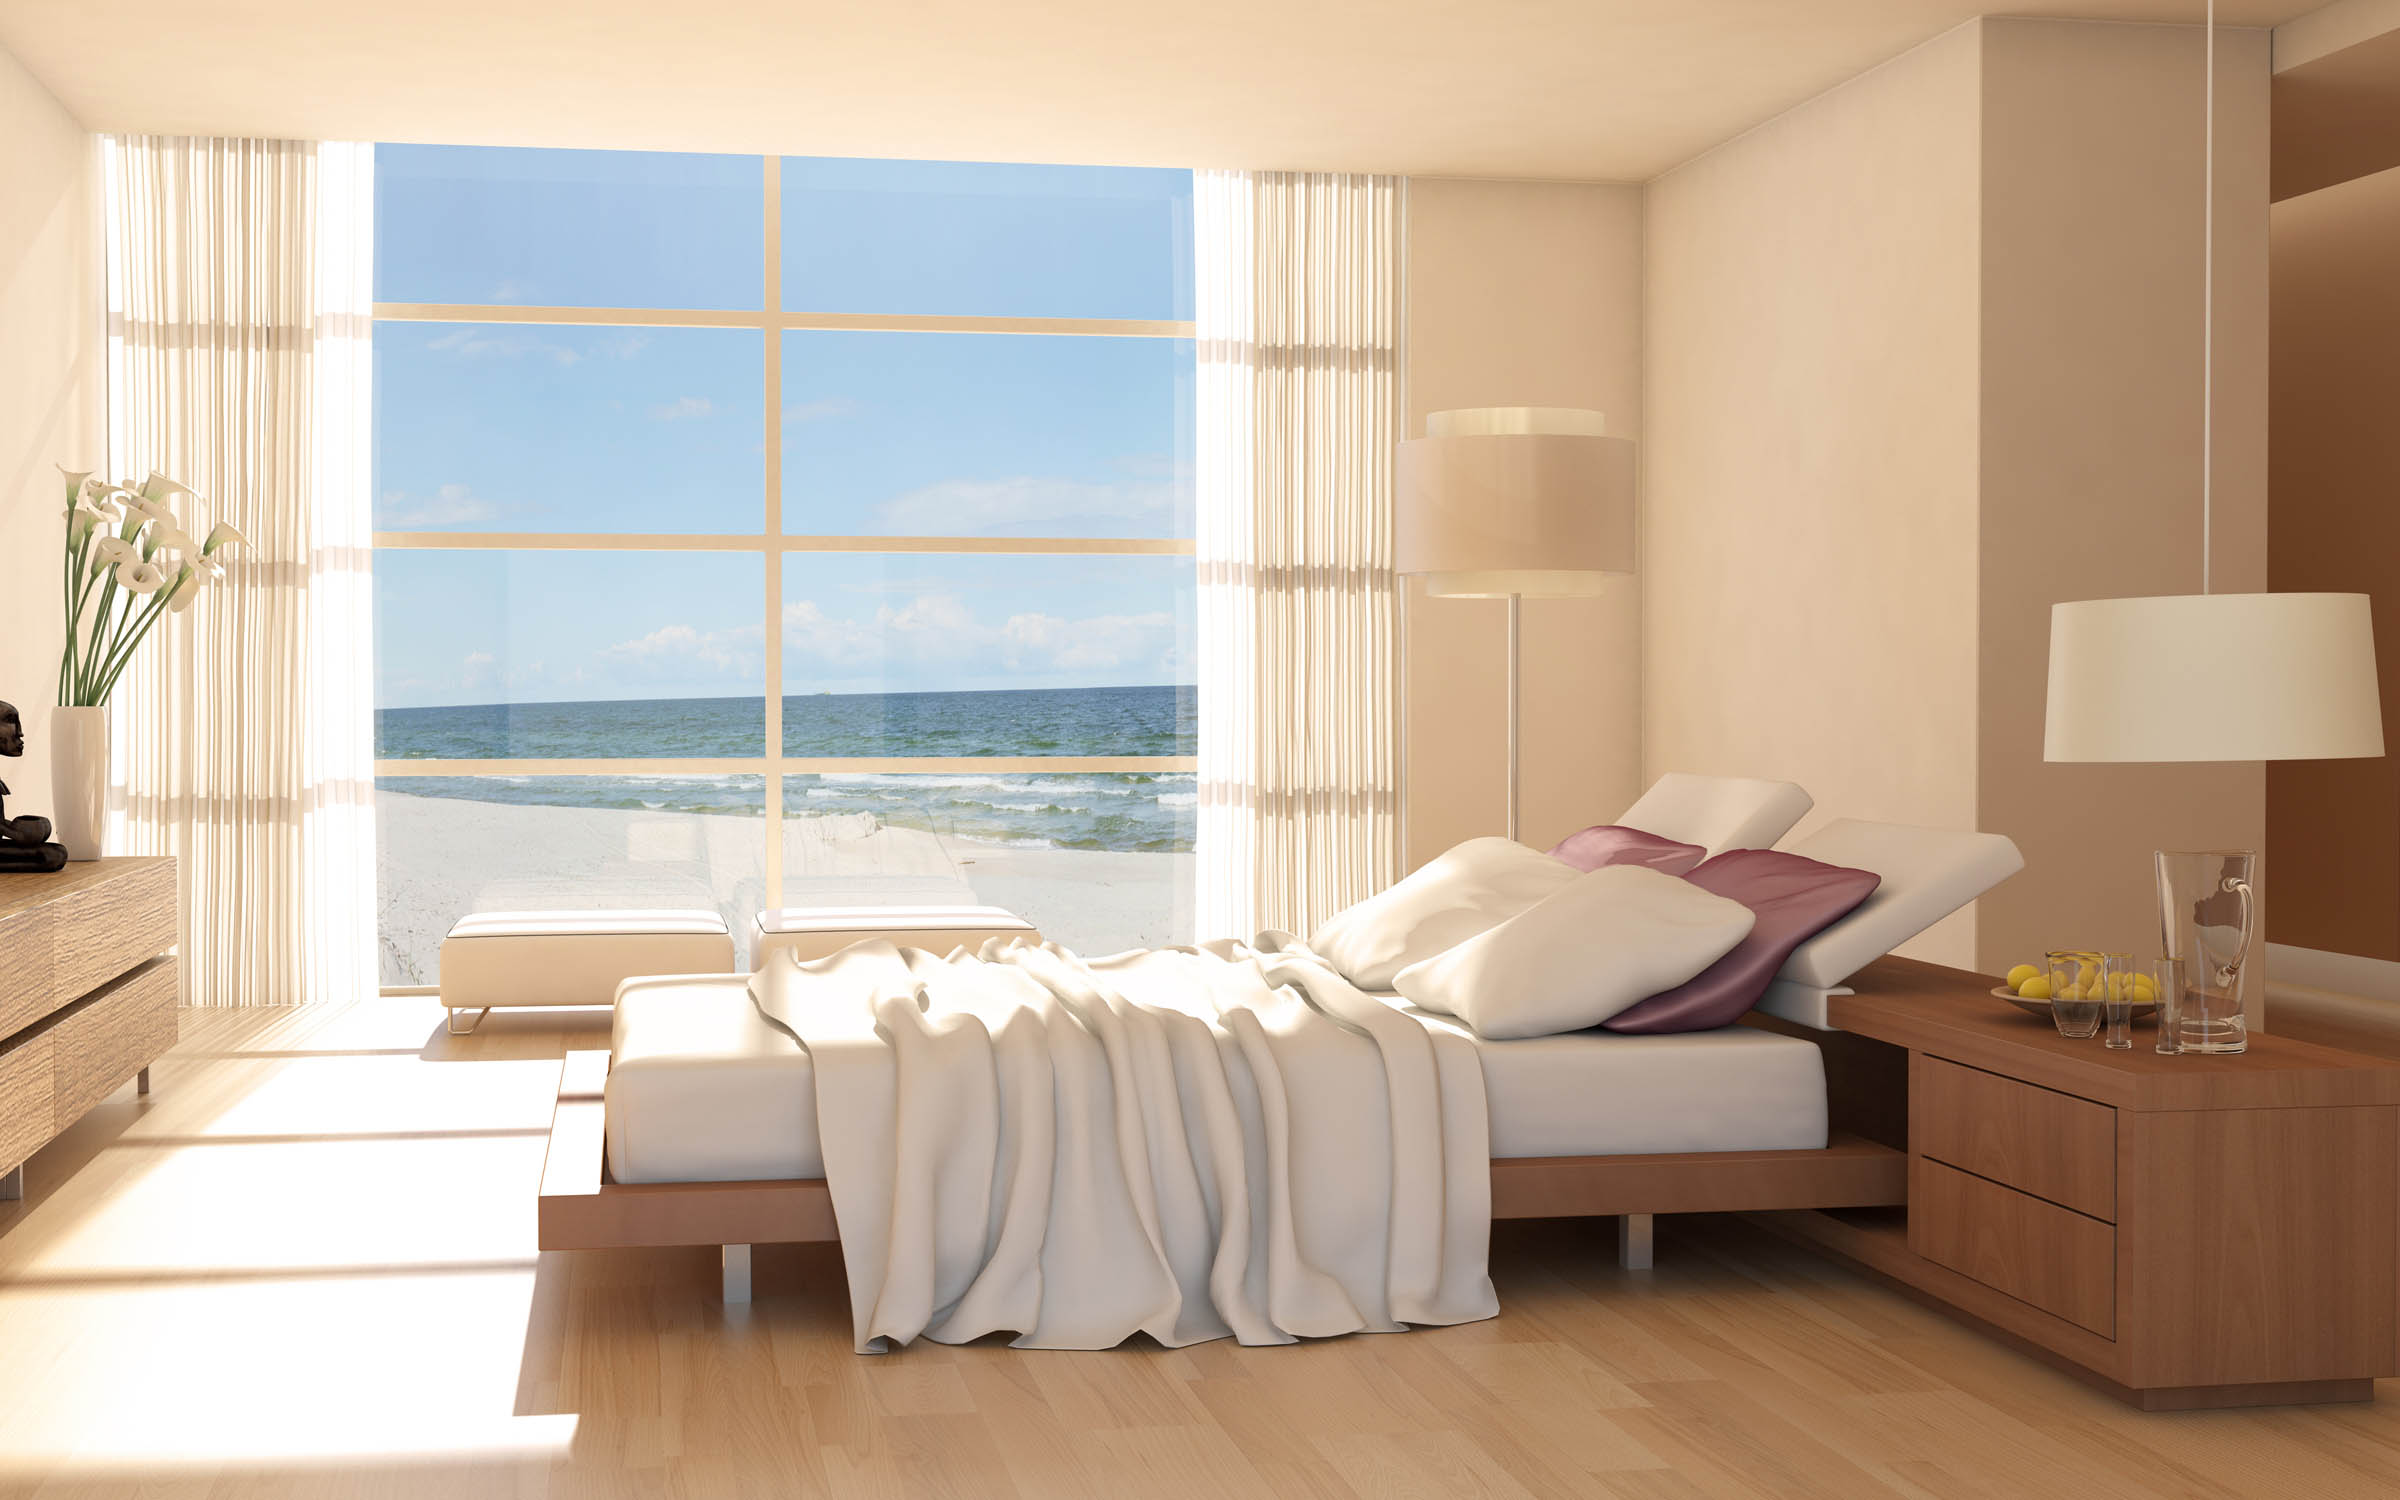 Bedroom in coastal residential area with wooden floors, and floor to ceiling windows with views of the beach.